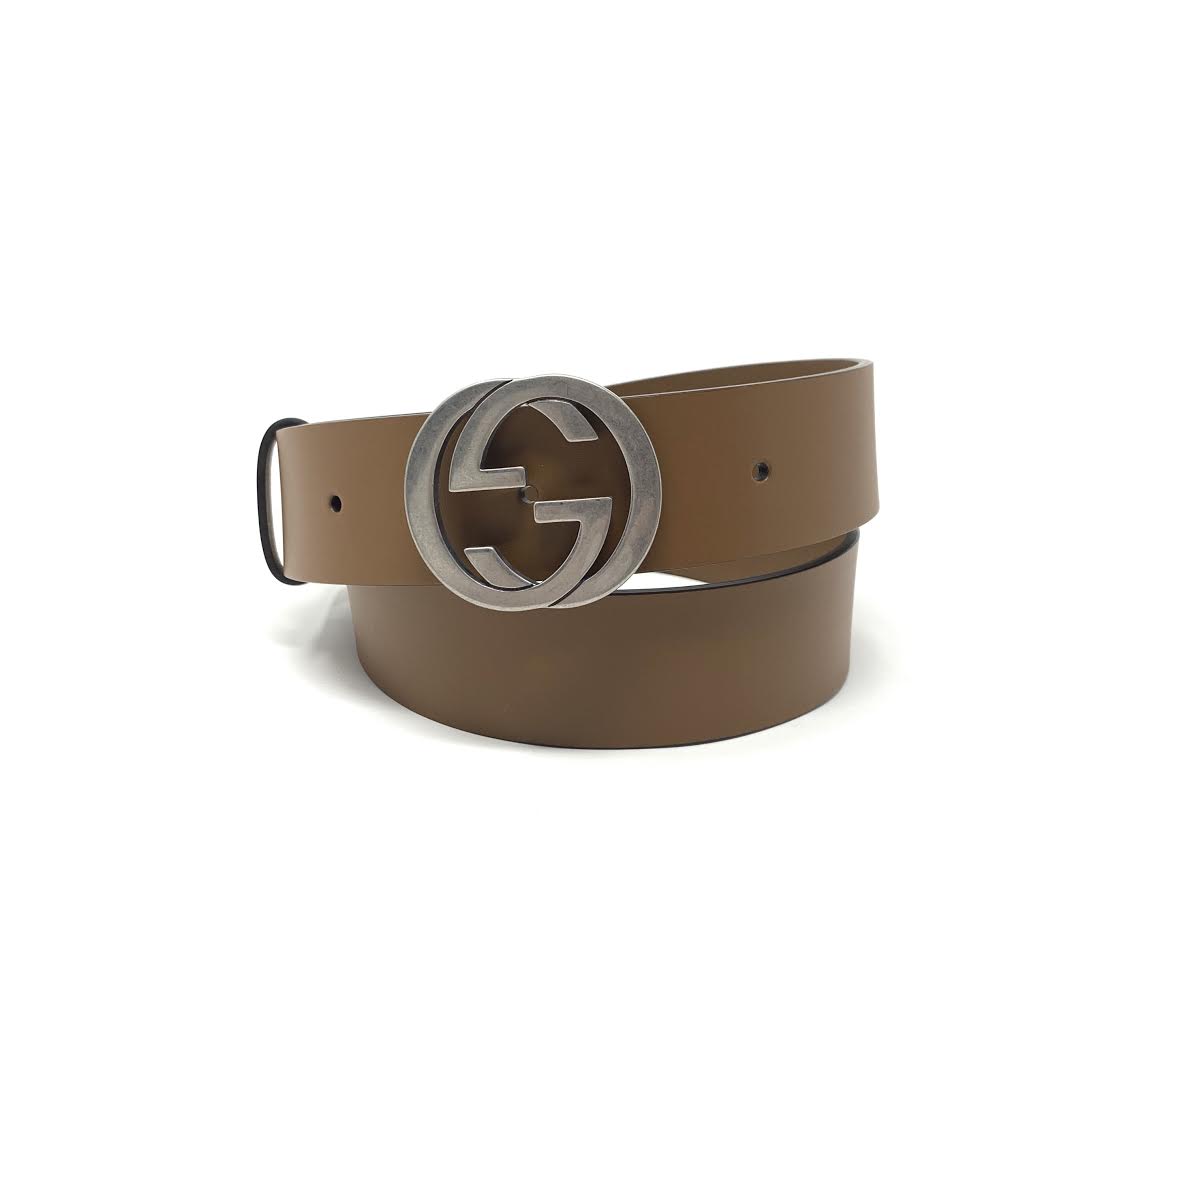 Authenticated Used Gucci belt beige brown silver interlocking